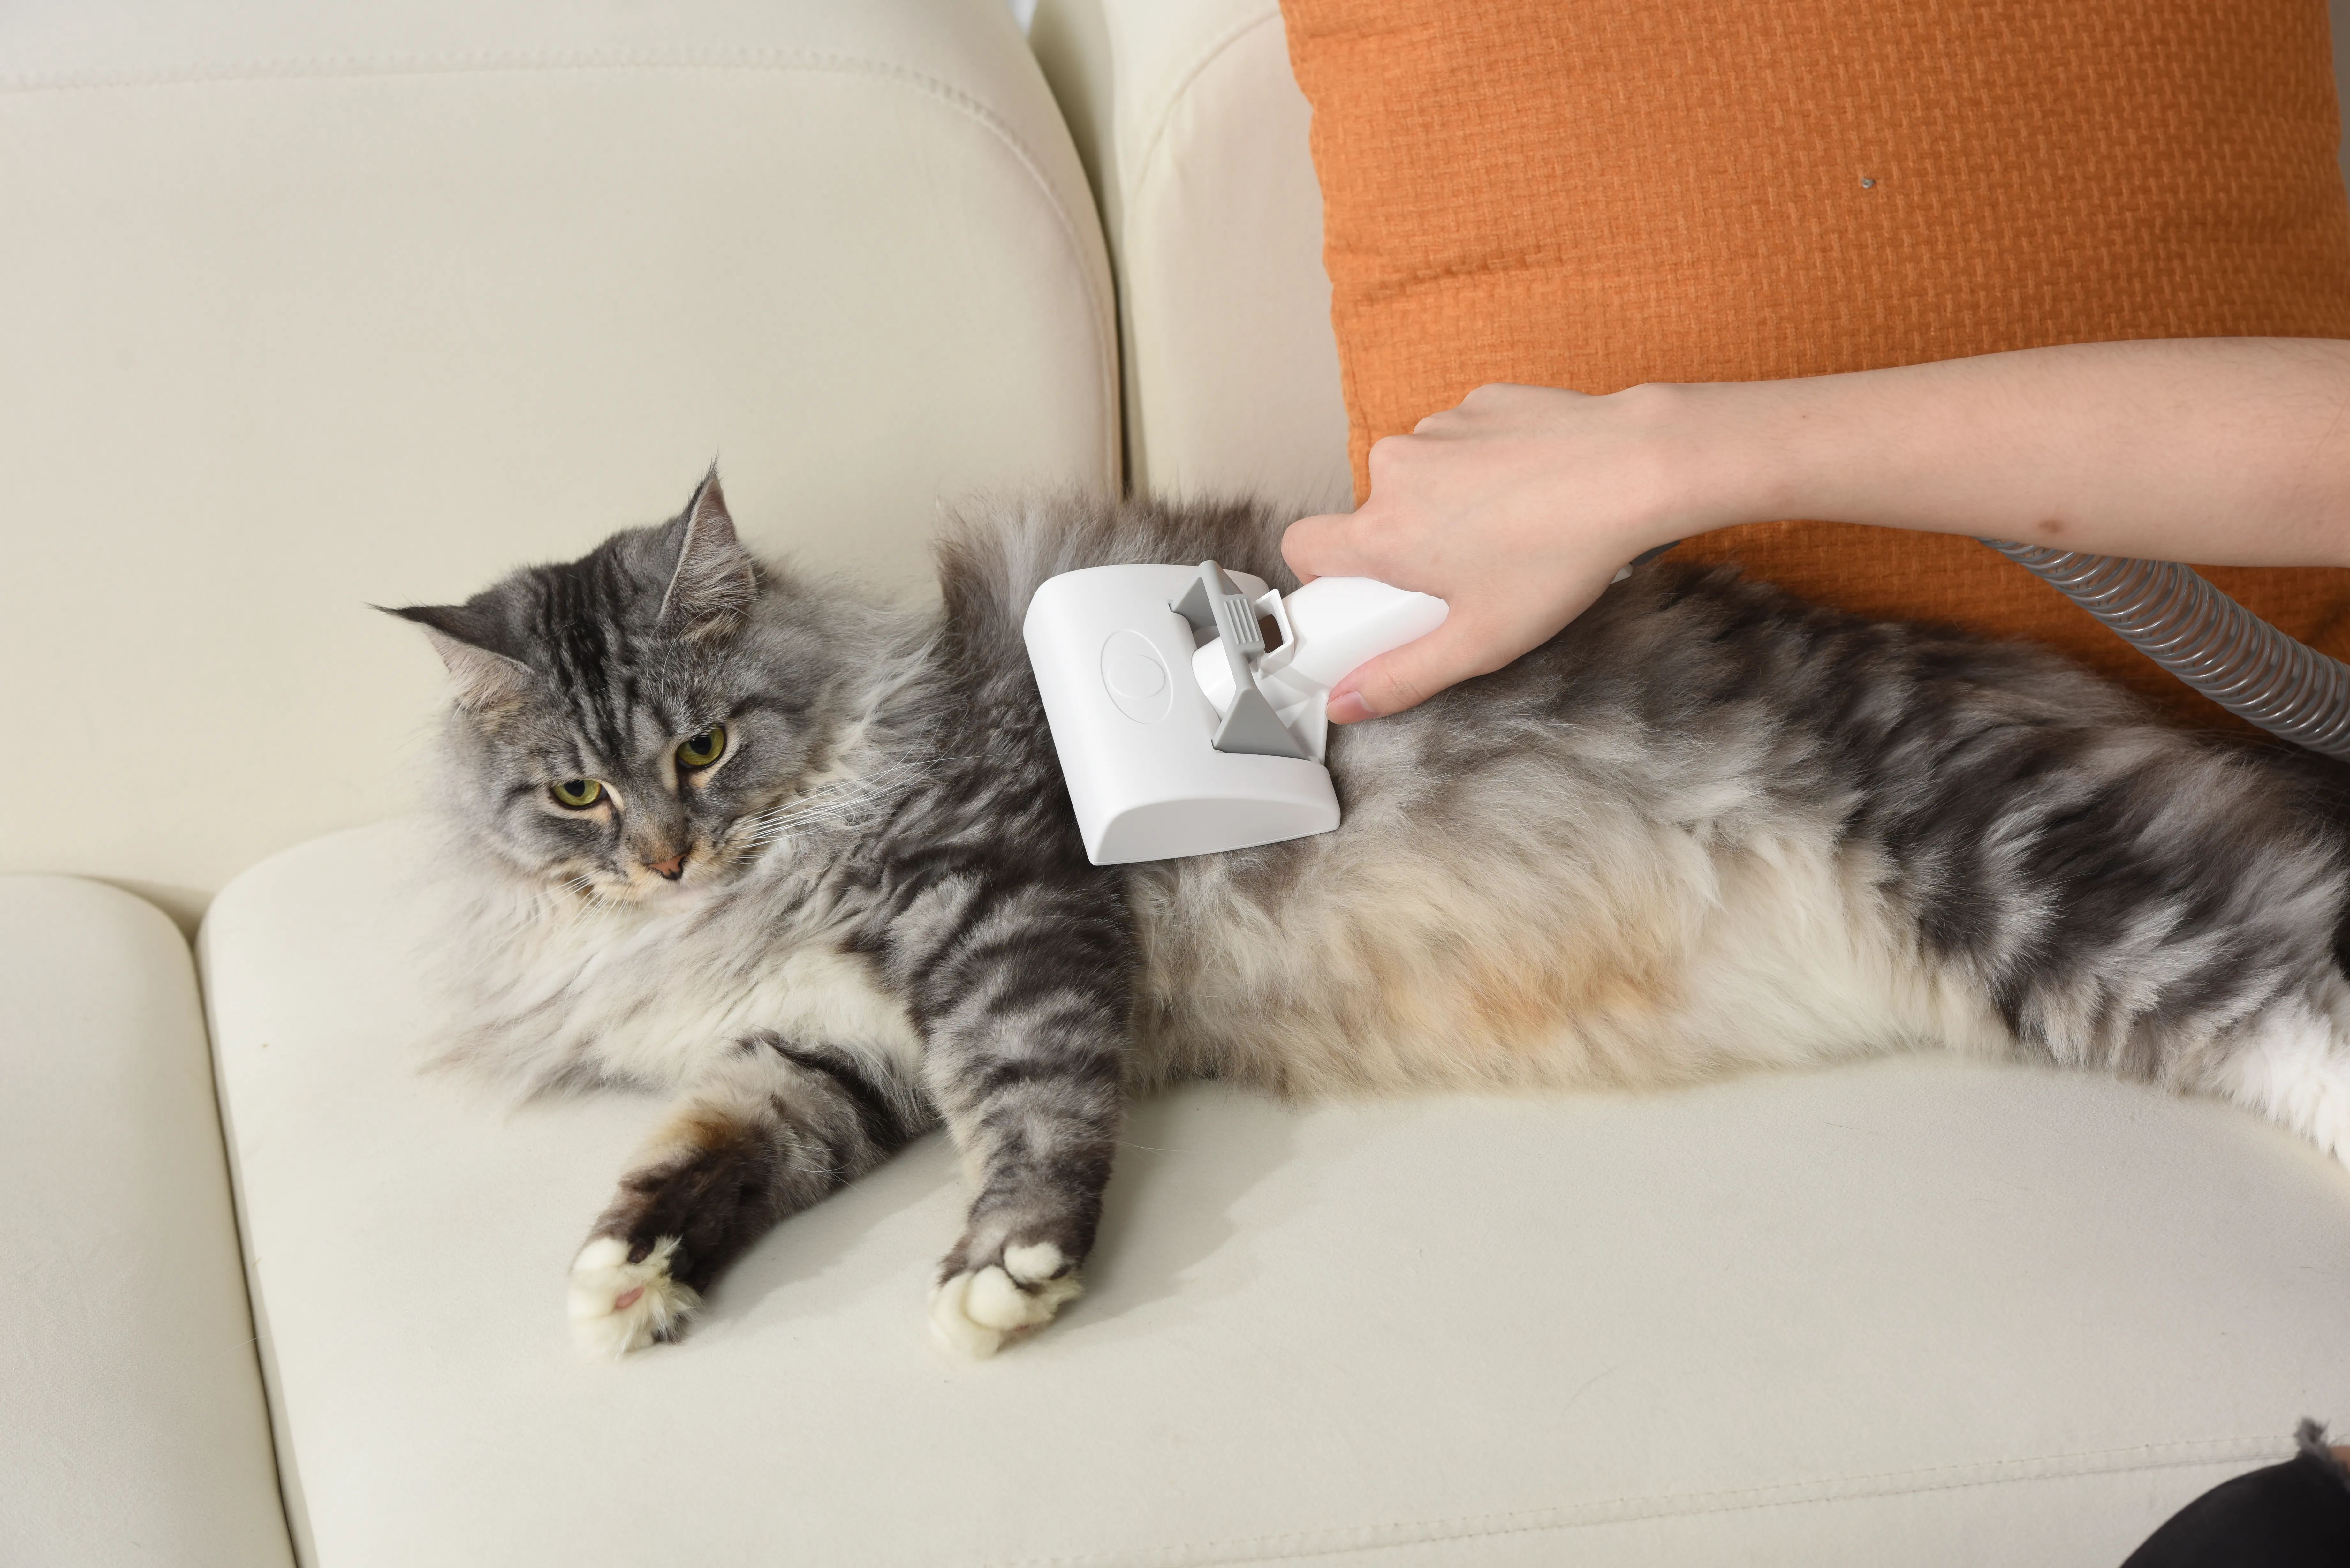 A Comprehensive Guide to Keeping Your Feline Friend Purr-fectly Groomed